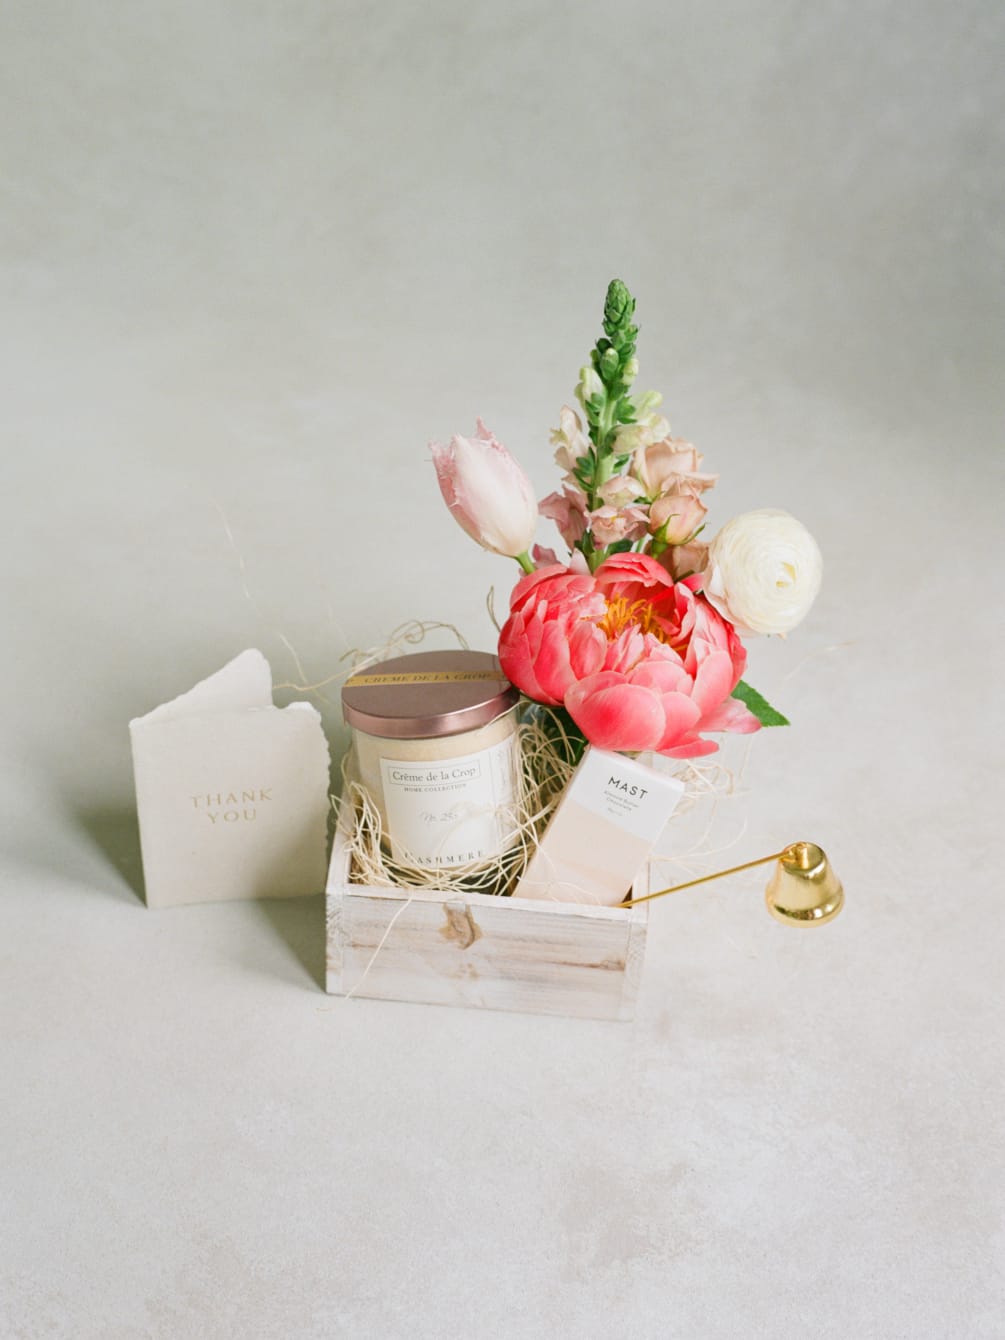 The Perfect Thank You gift. 
-A small Arrangement 
- Cashmere Candle
- 1